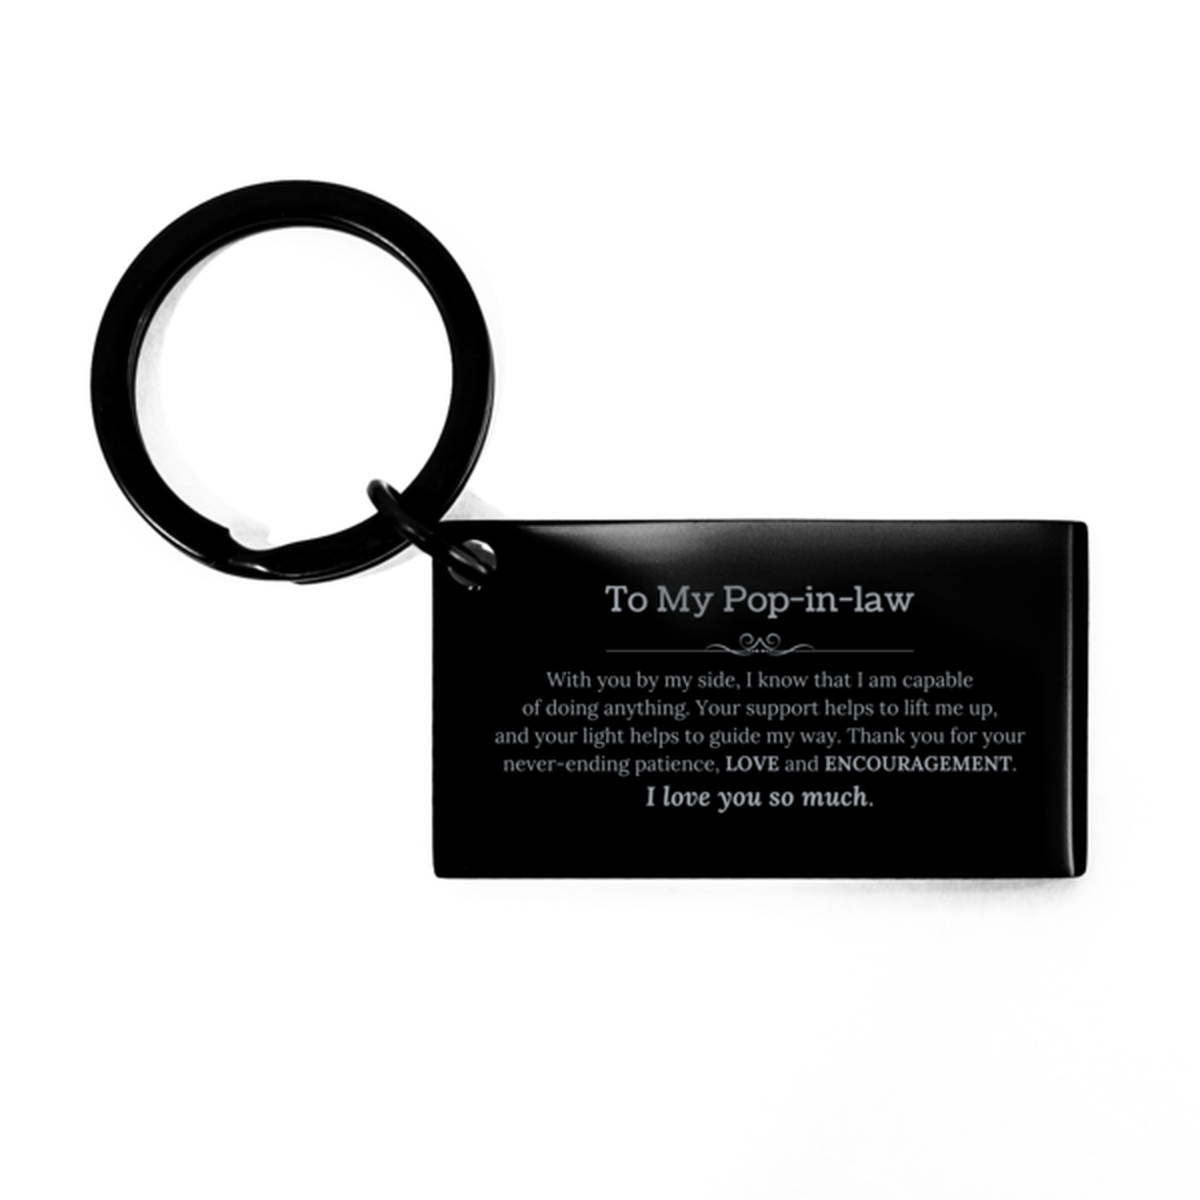 Appreciation Pop-in-law Keychain Gifts, To My Pop-in-law Birthday Christmas Wedding Keepsake Gifts for Pop-in-law With you by my side, I know that I am capable of doing anything. I love you so much